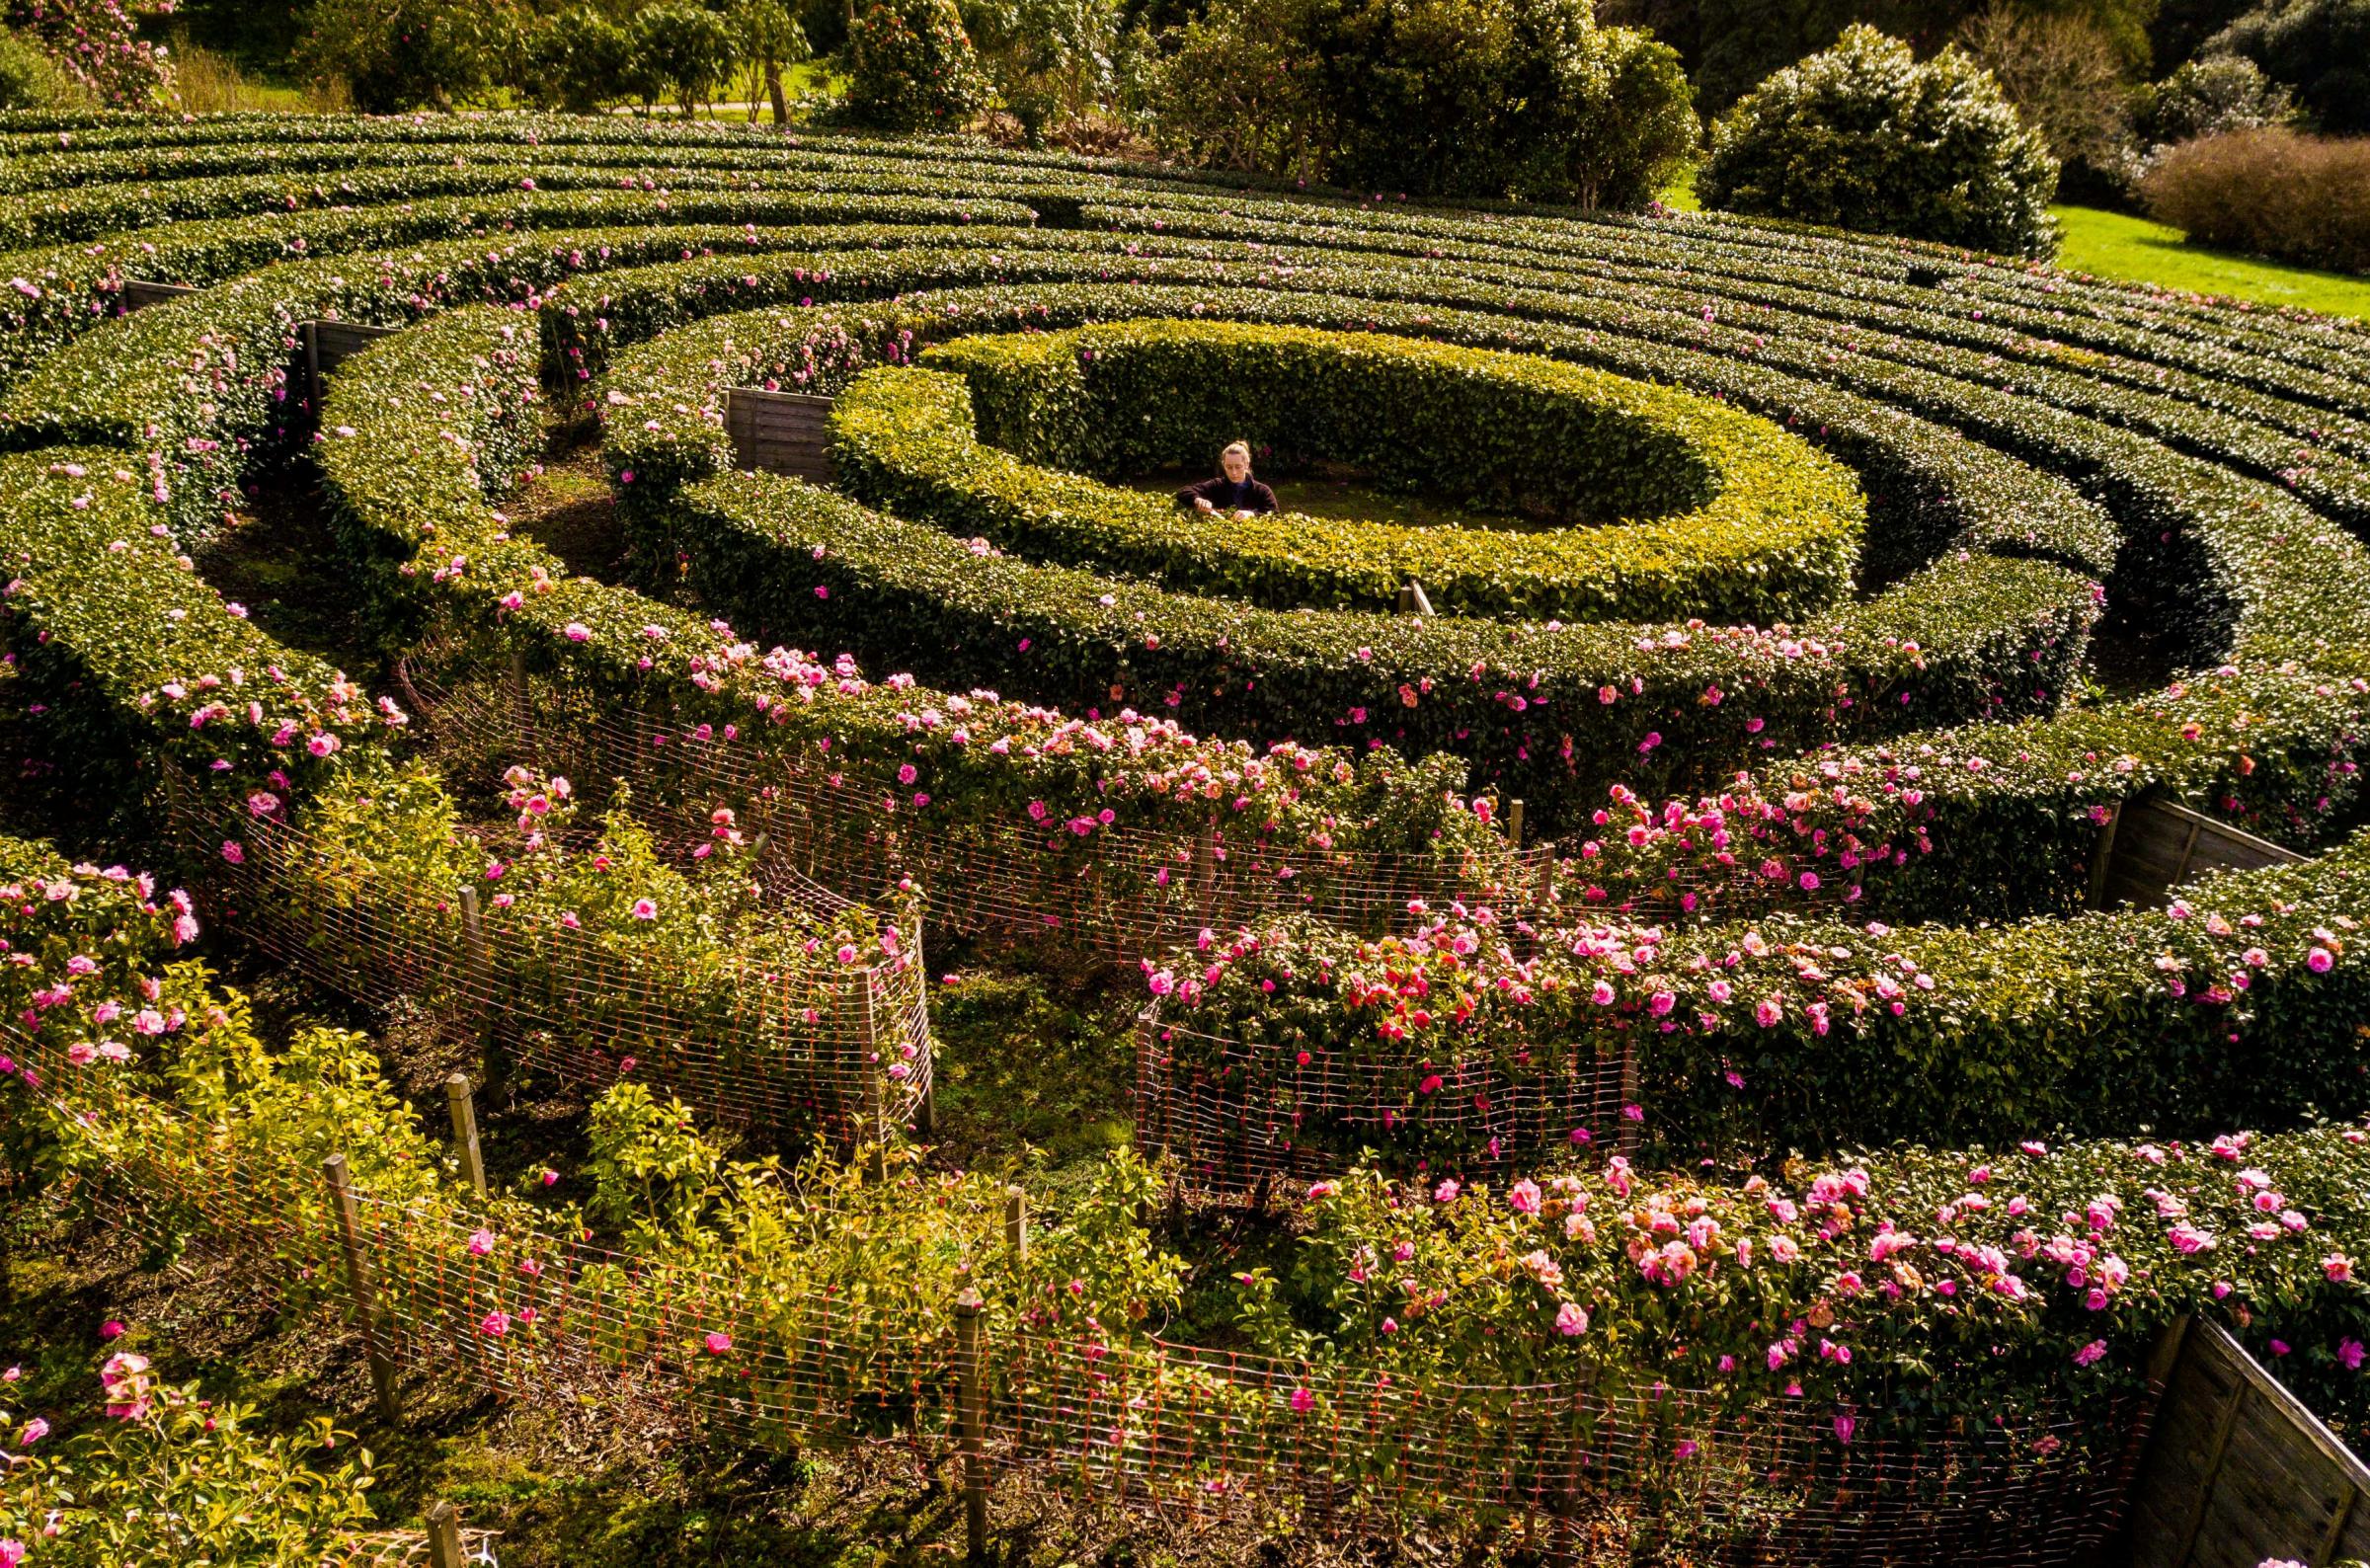 The worlds largest Camellia Maze comes into bloom at Tregothnan, Cornwall. 17th March 2021 See SWNS story SWPLmaze. These incredible pictures show the worlds largest Camellia maze that has just sprung into bloom. The circular maze is made of row